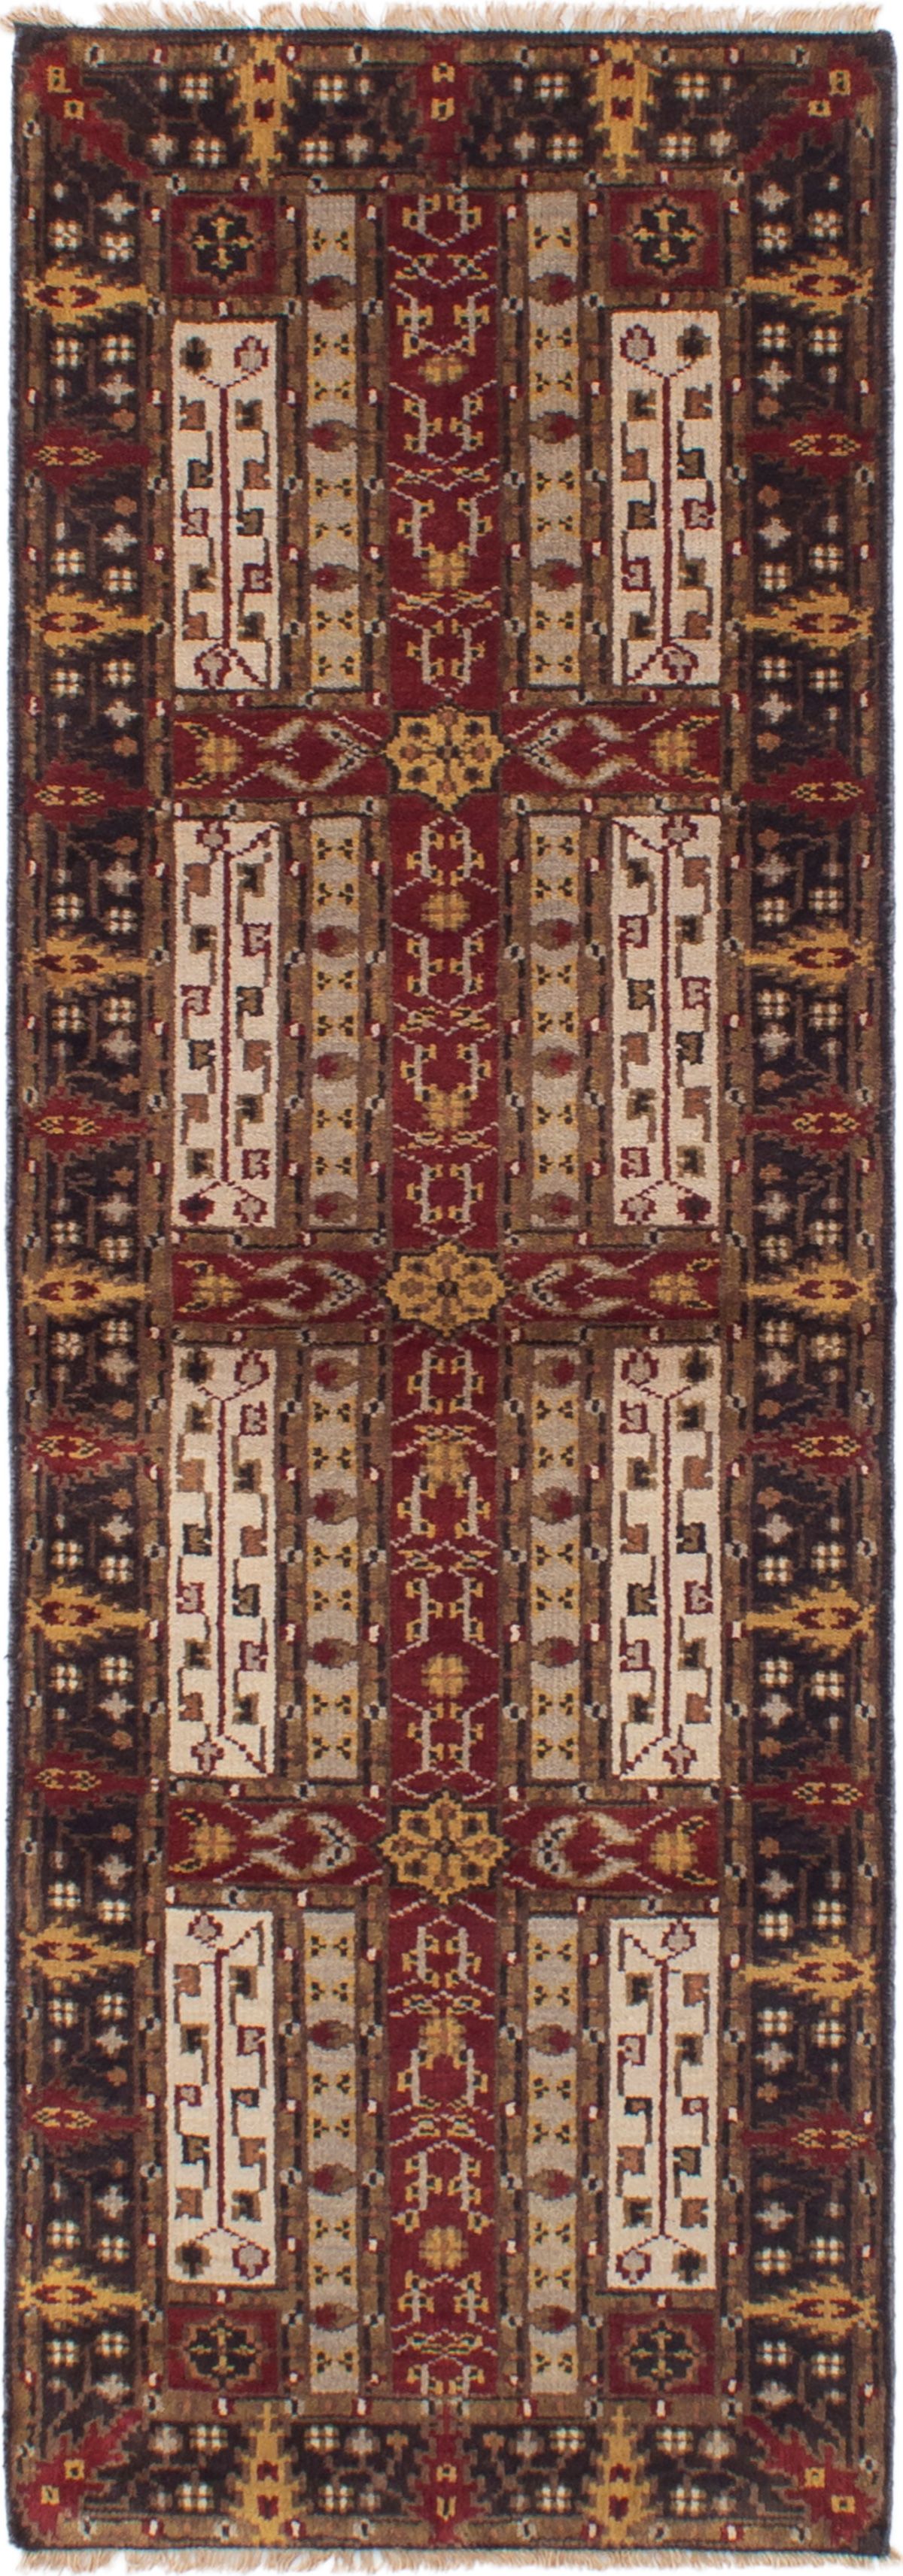 Hand-knotted Royal Mahal Dark Red Wool Rug 2'6" x 8'0" Size: 2'6" x 8'0"  